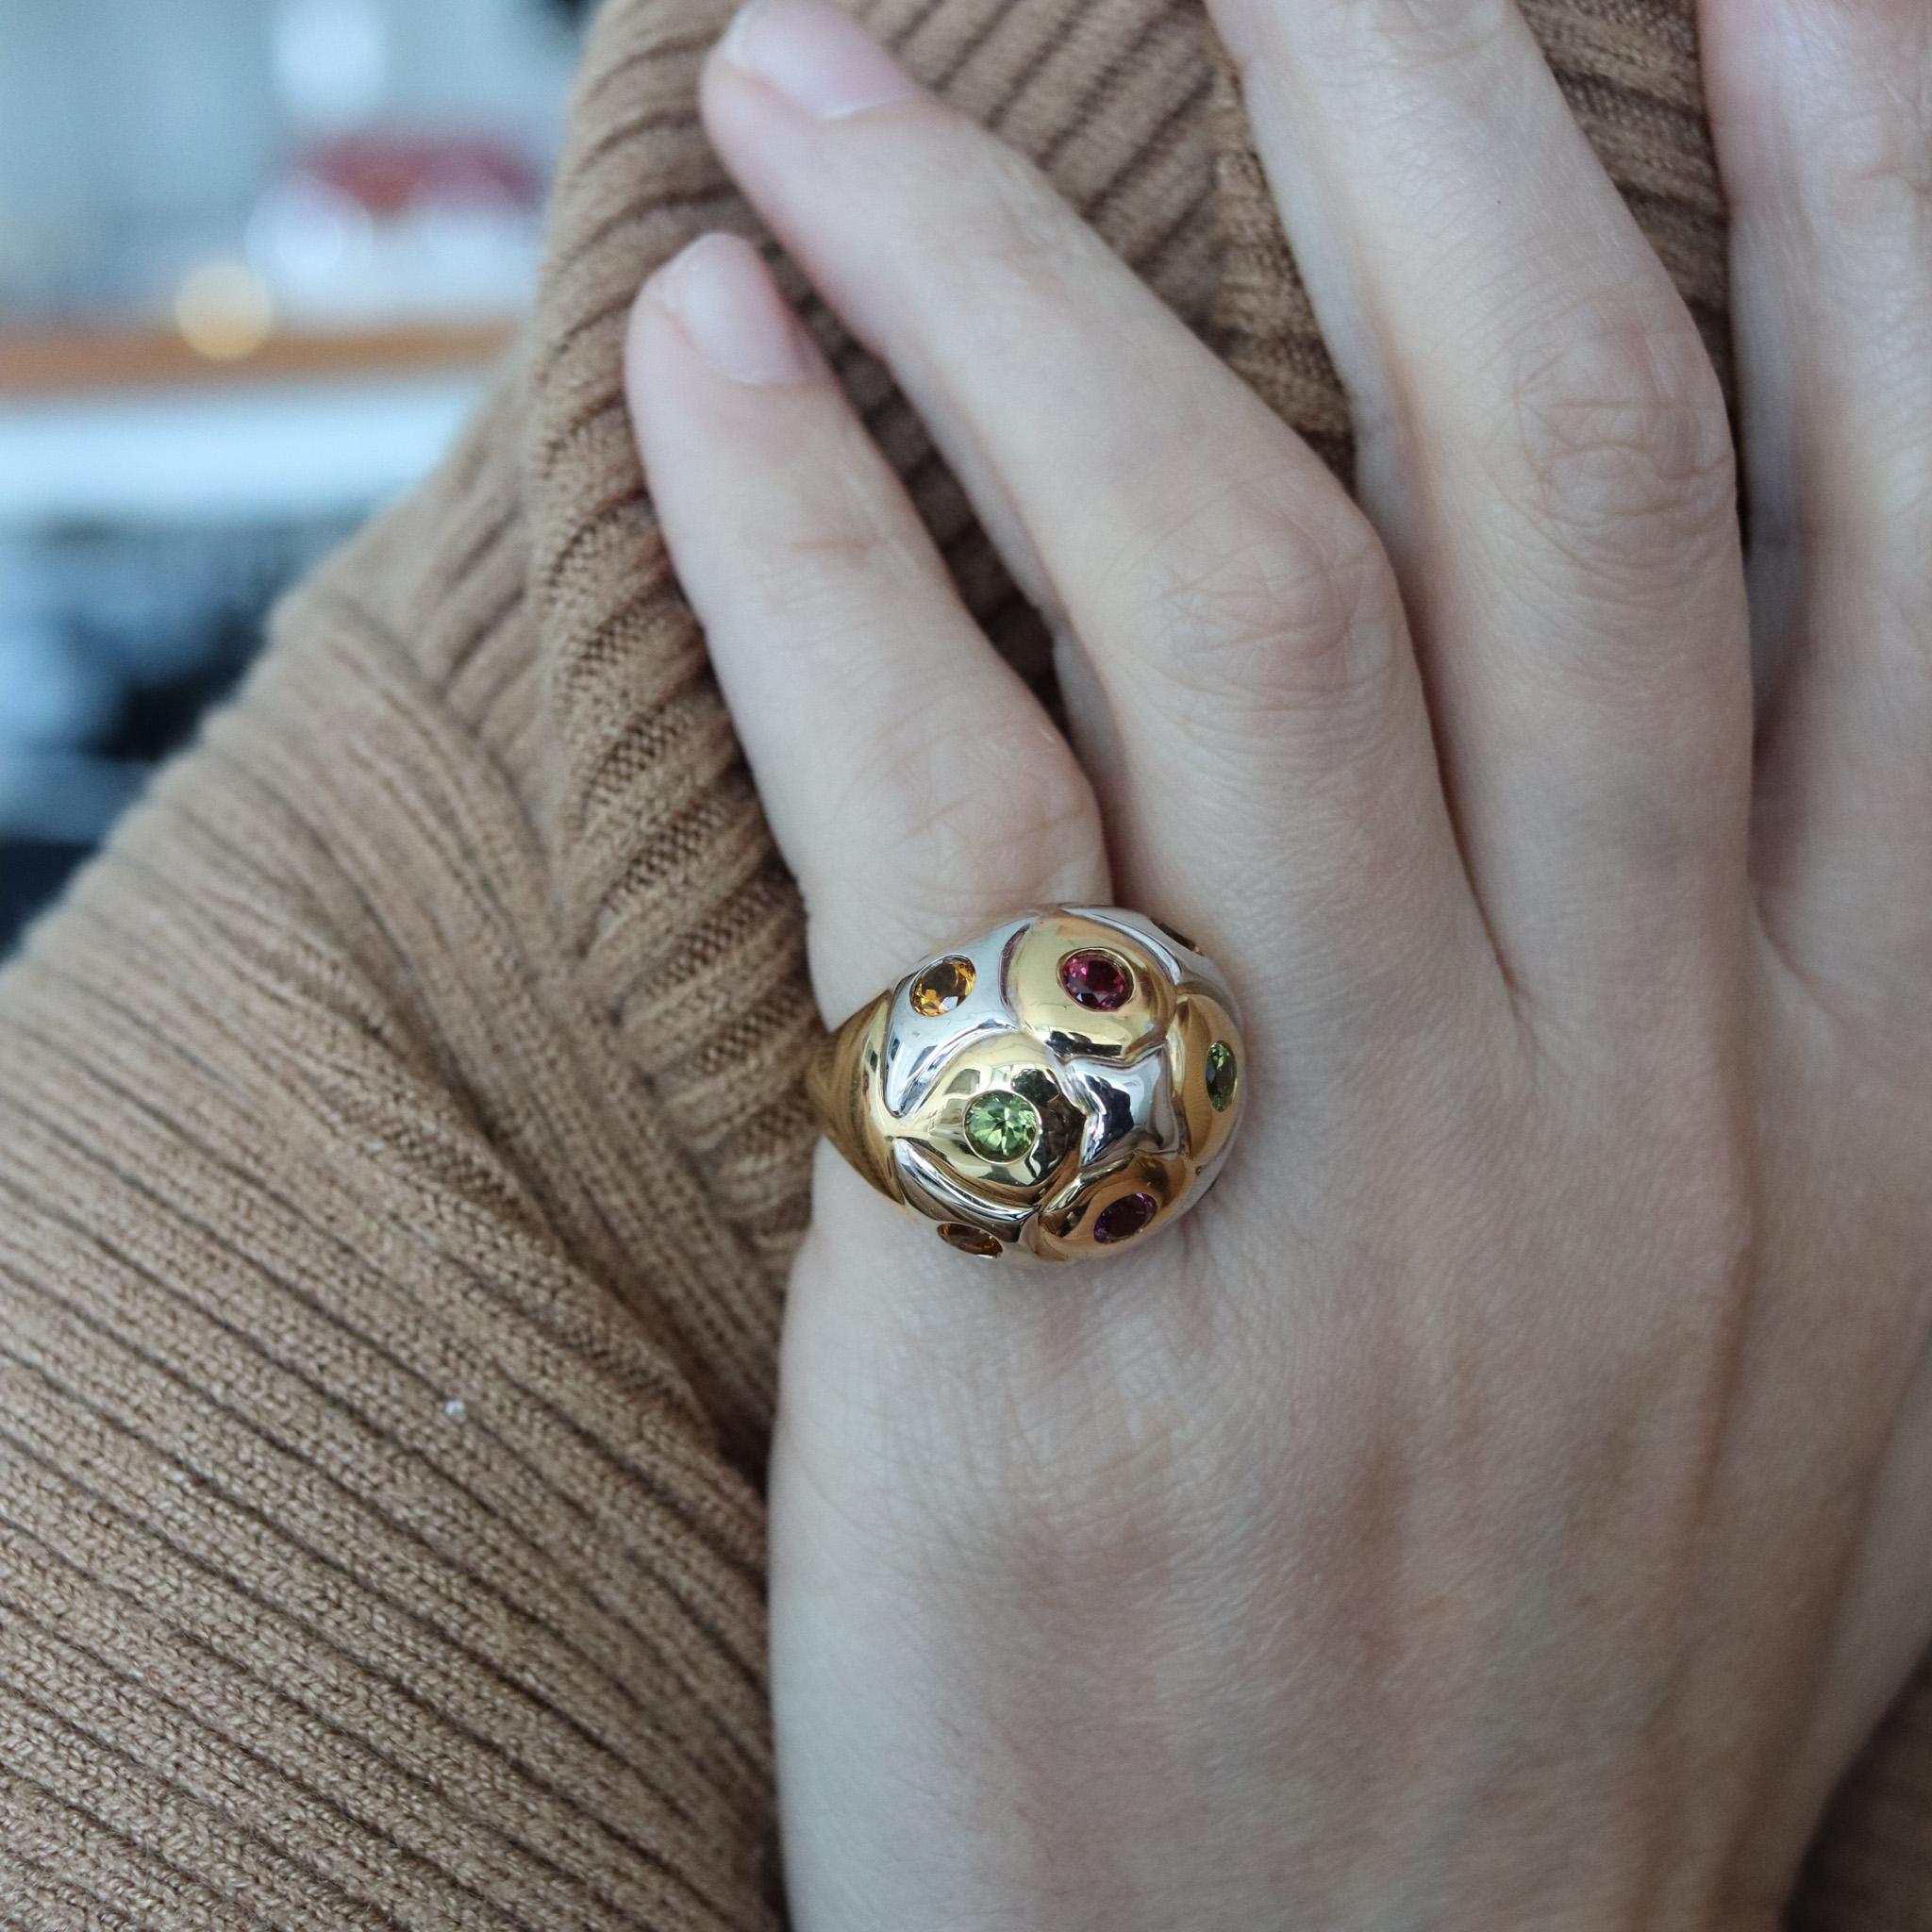 Bvlgari Roma Bombe Cocktail Ring Two Tones of 18Kt Gold with 1.80 Ctw Gemstones 6